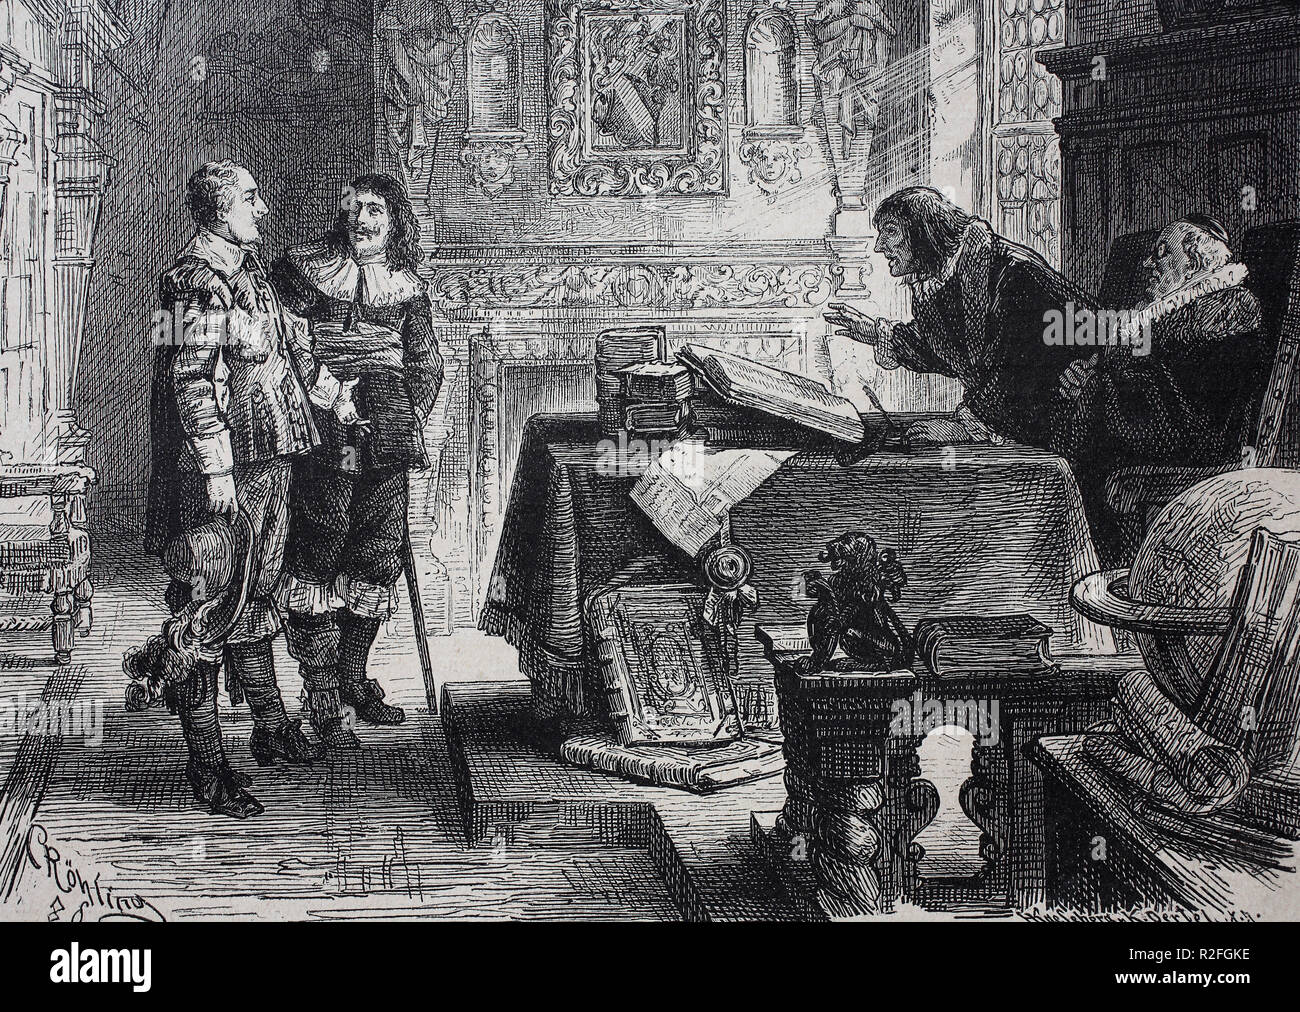 Digital improved reproduction, a interrogation of the studiosus Wallenstein in front of the rector of the school in Altdorf, ca 1626, Albrecht Wenzel Eusebius von Wallenstein, 1583-1634, also von Waldstein, a Bohemian military leader and nobleman who gained prominence during the Thirty Years' War (1618â€“1648), in the Catholic side, from an original print from the 19th century Stock Photo